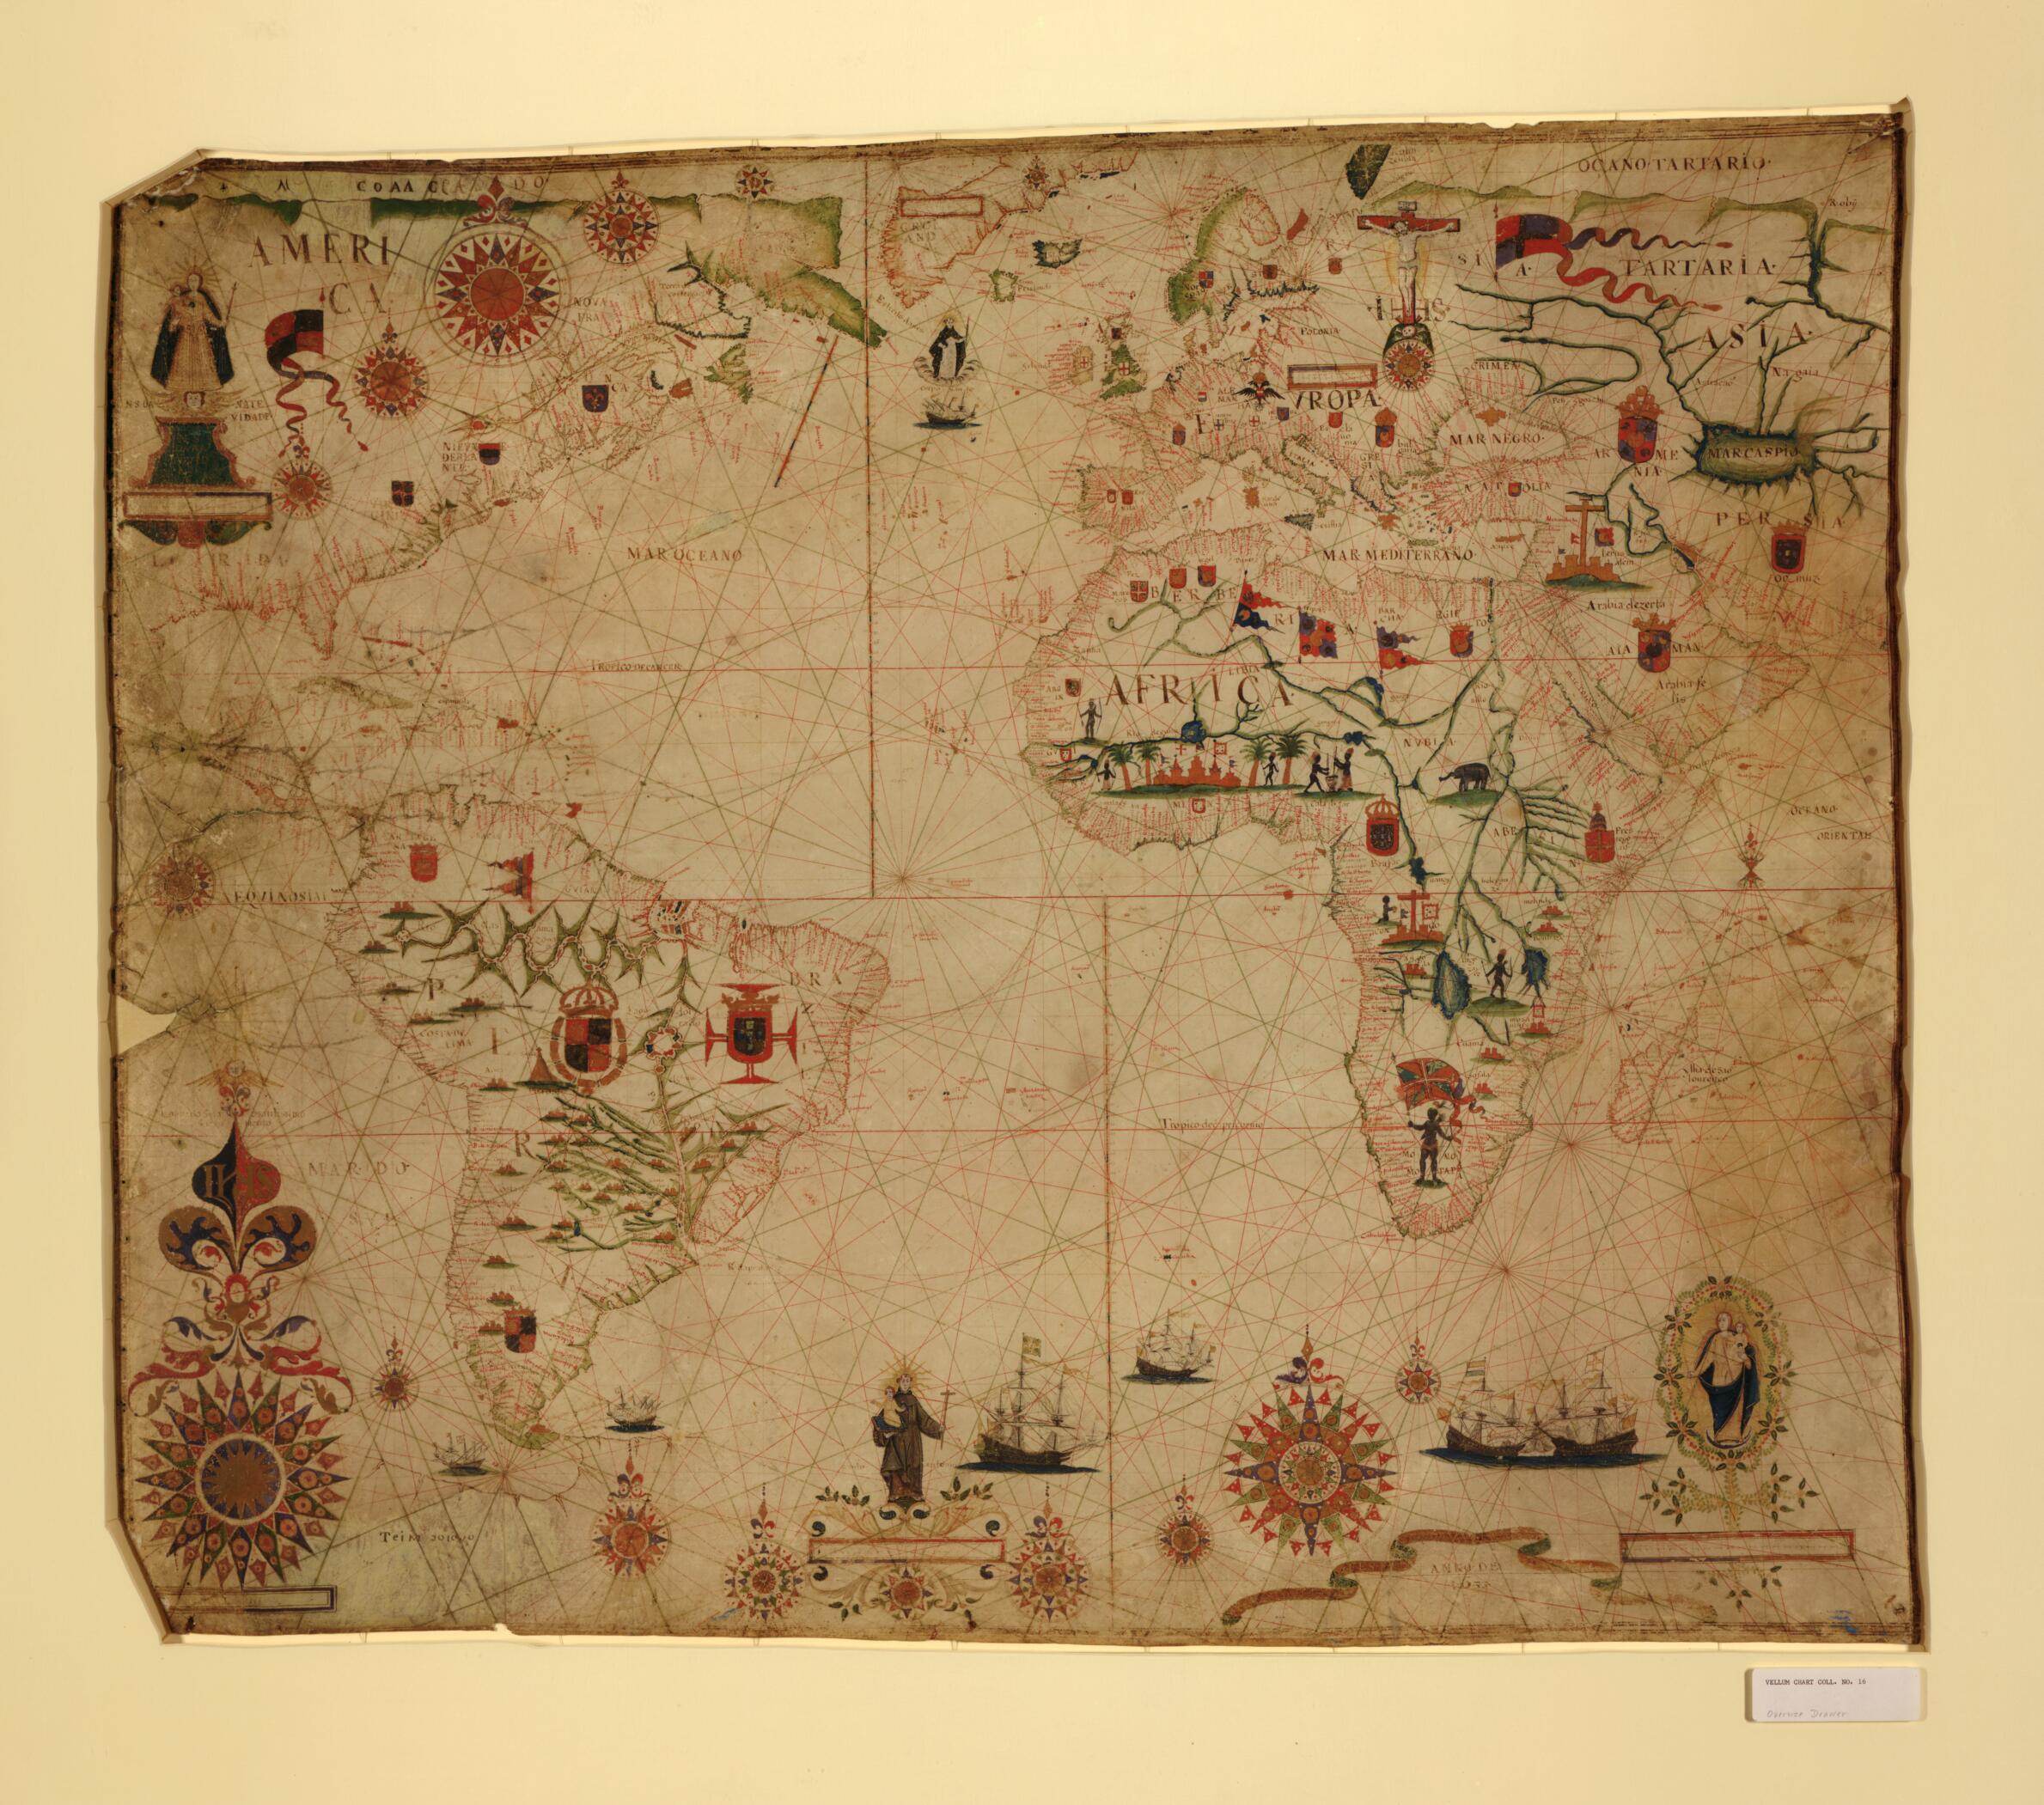 This old map of A Portolan Chart of the Atlantic Ocean and Adjacent Continents from 1633 was created by Pascoal Roiz in 1633